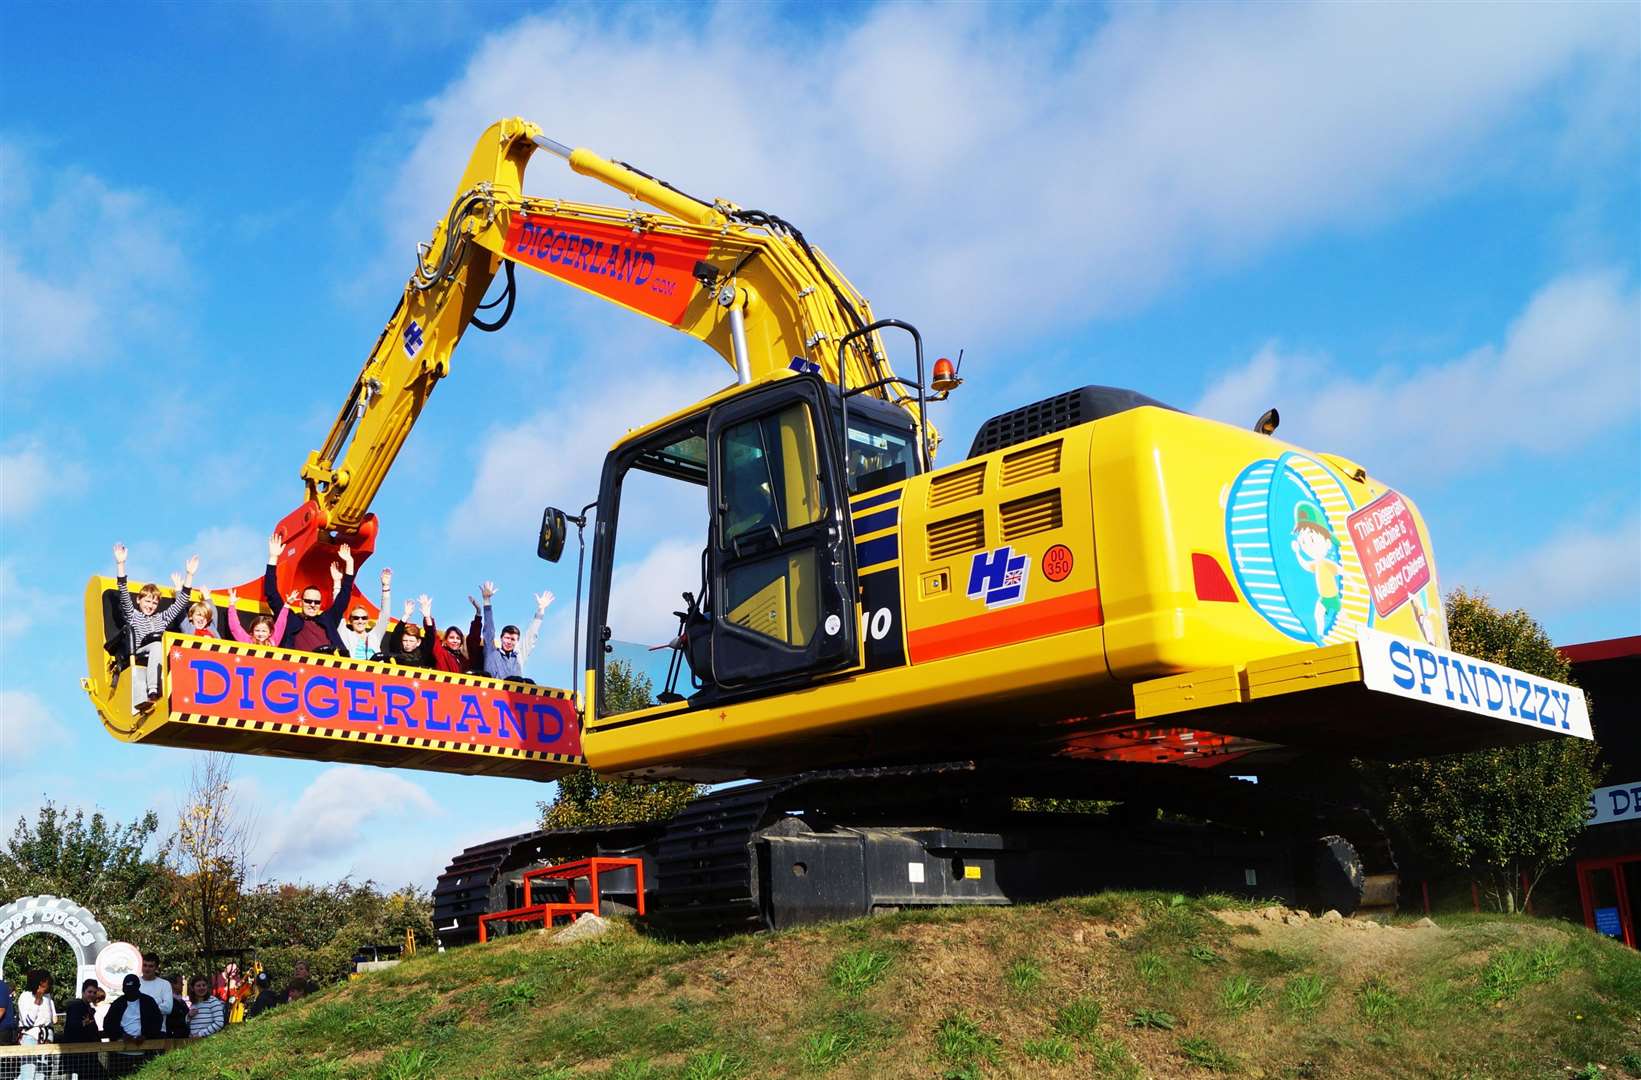 There's lots to do at Diggerland this summer